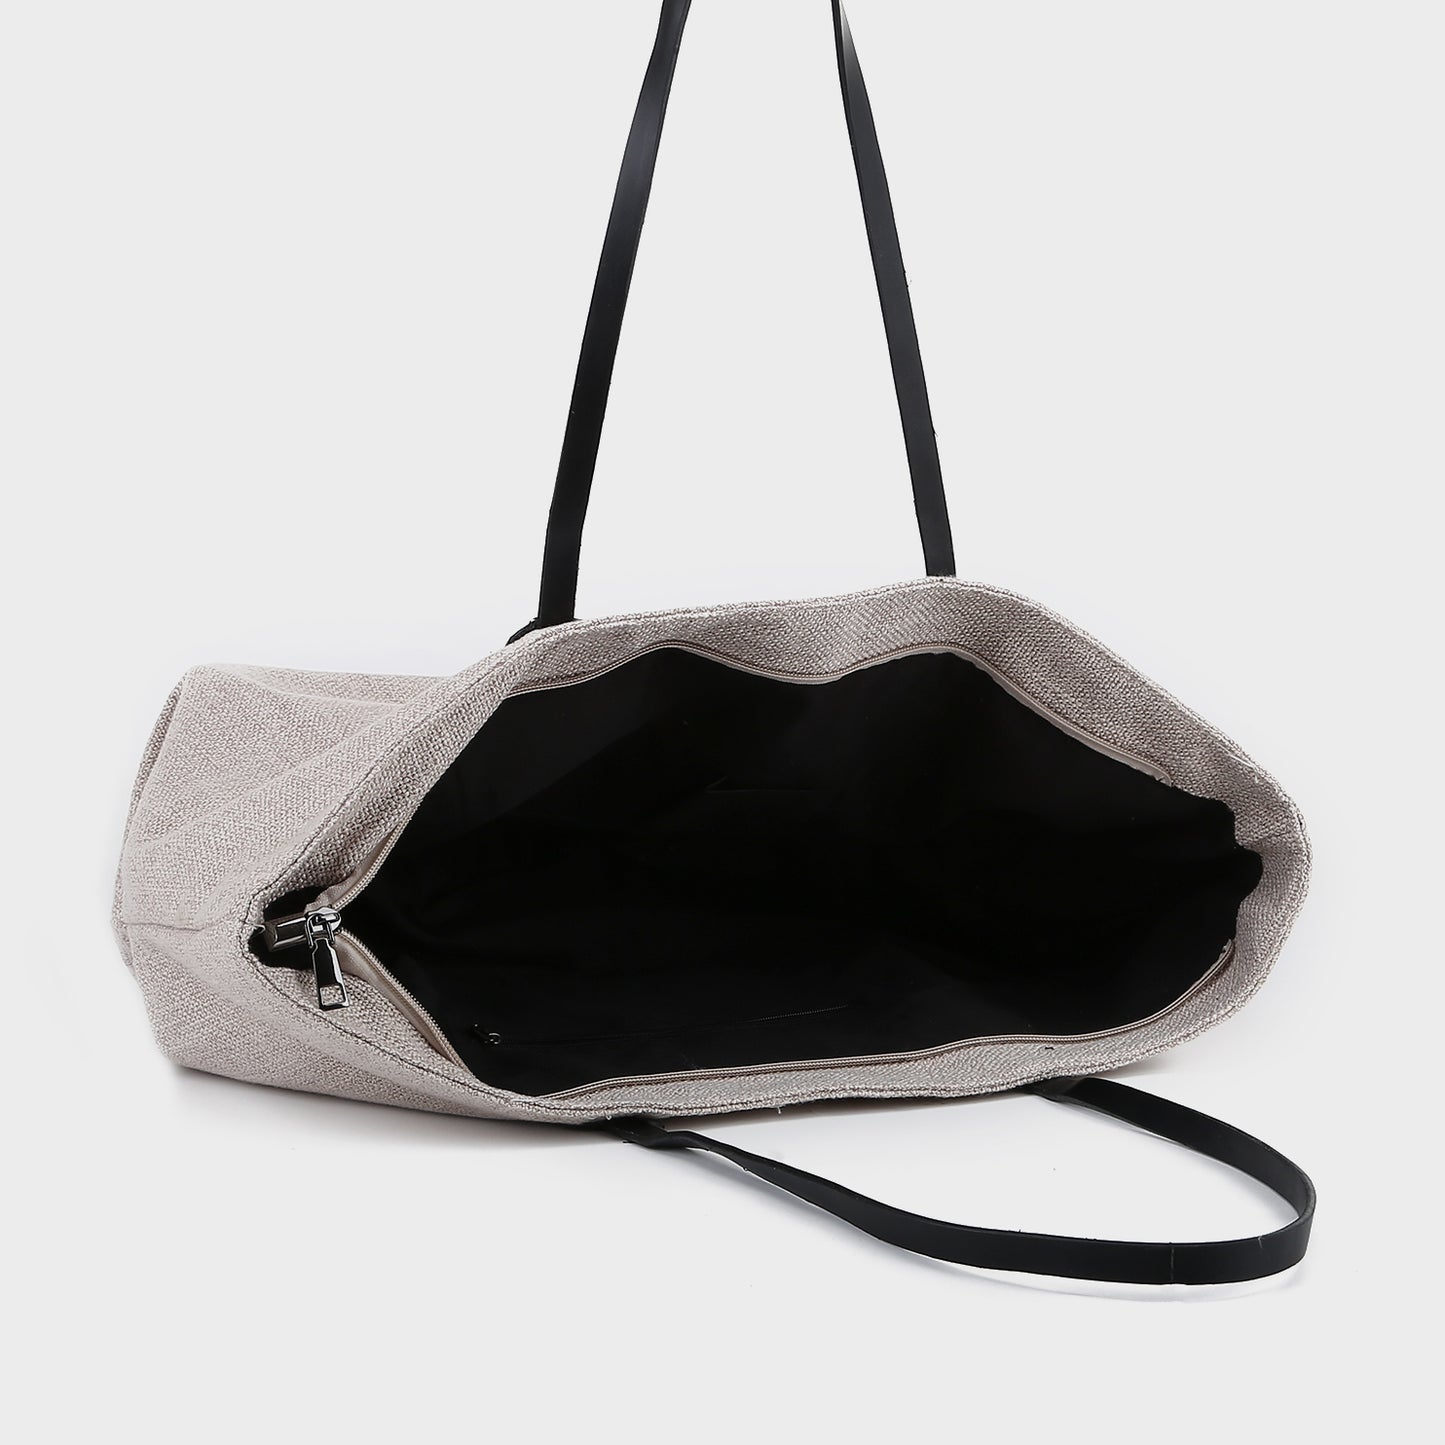 PU leather handle classic canvas tote